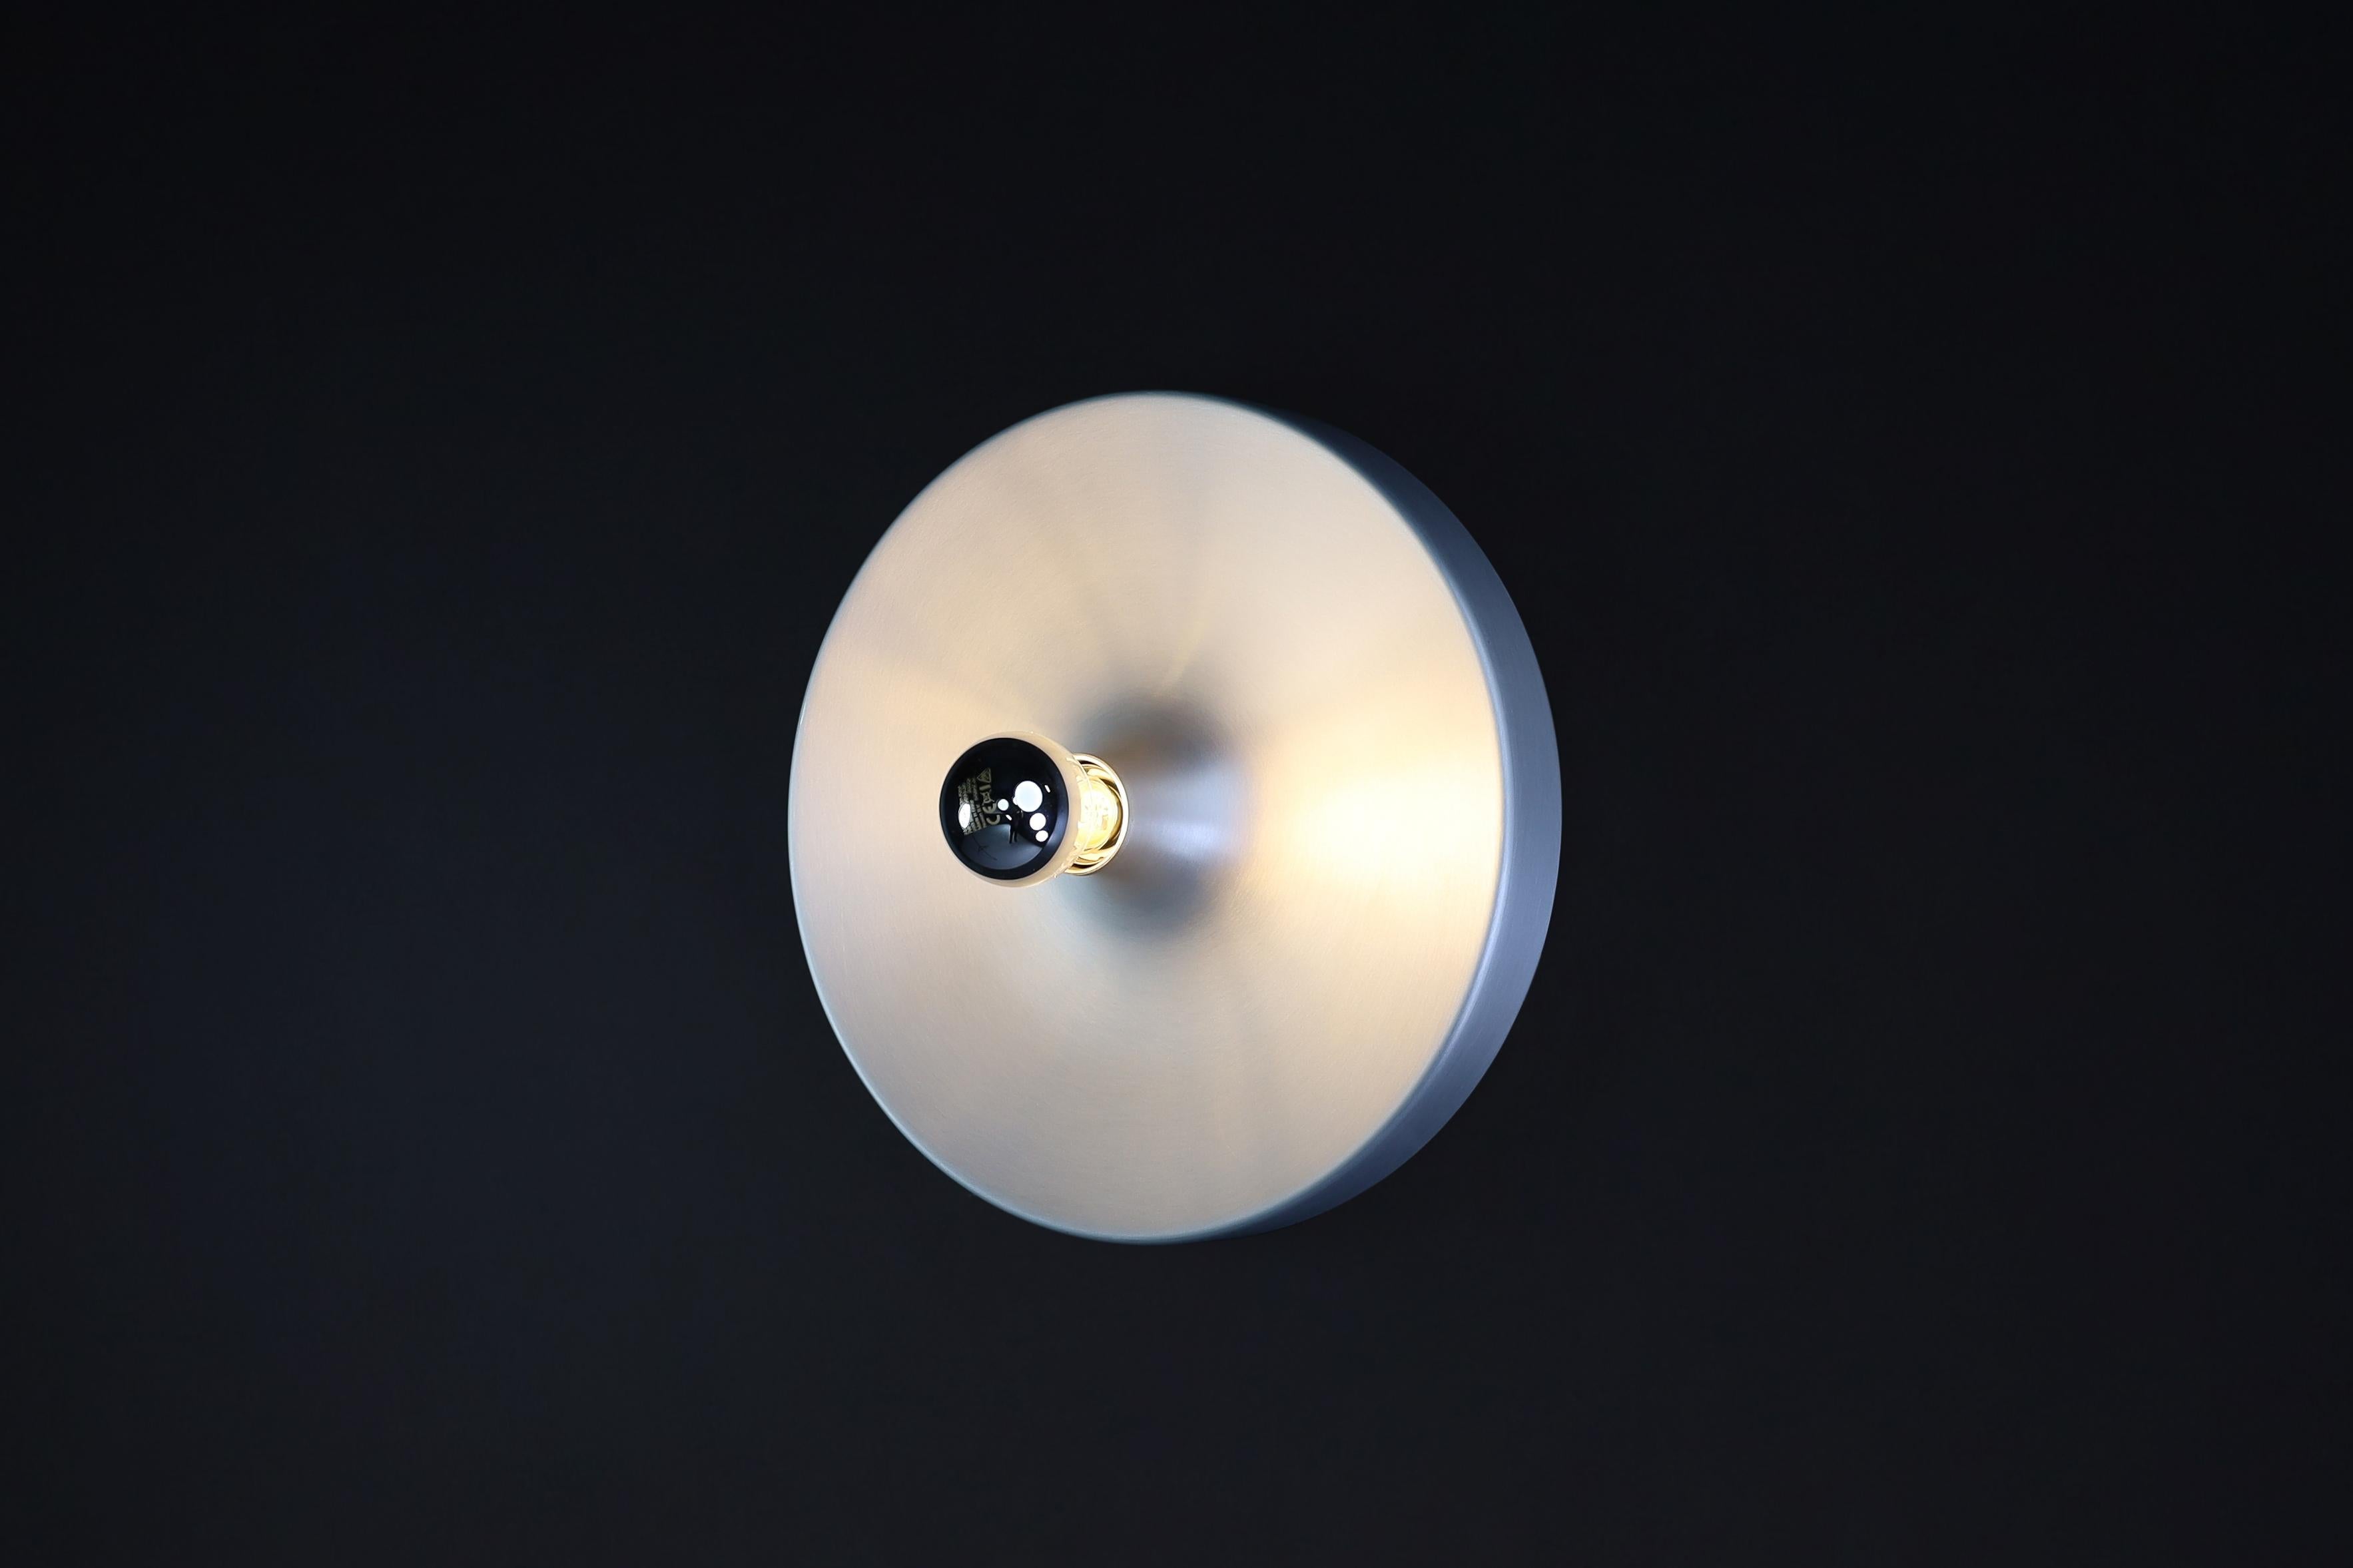 Charlotte Perriand Aluminum Disc Wall Lights, Germany 1960s

This collection of Charlotte Perriand Aluminum Disc Wall Lights is quite extensive. They were commissioned and handpicked by Charlotte Perriand herself in Germany during the 1960s. These